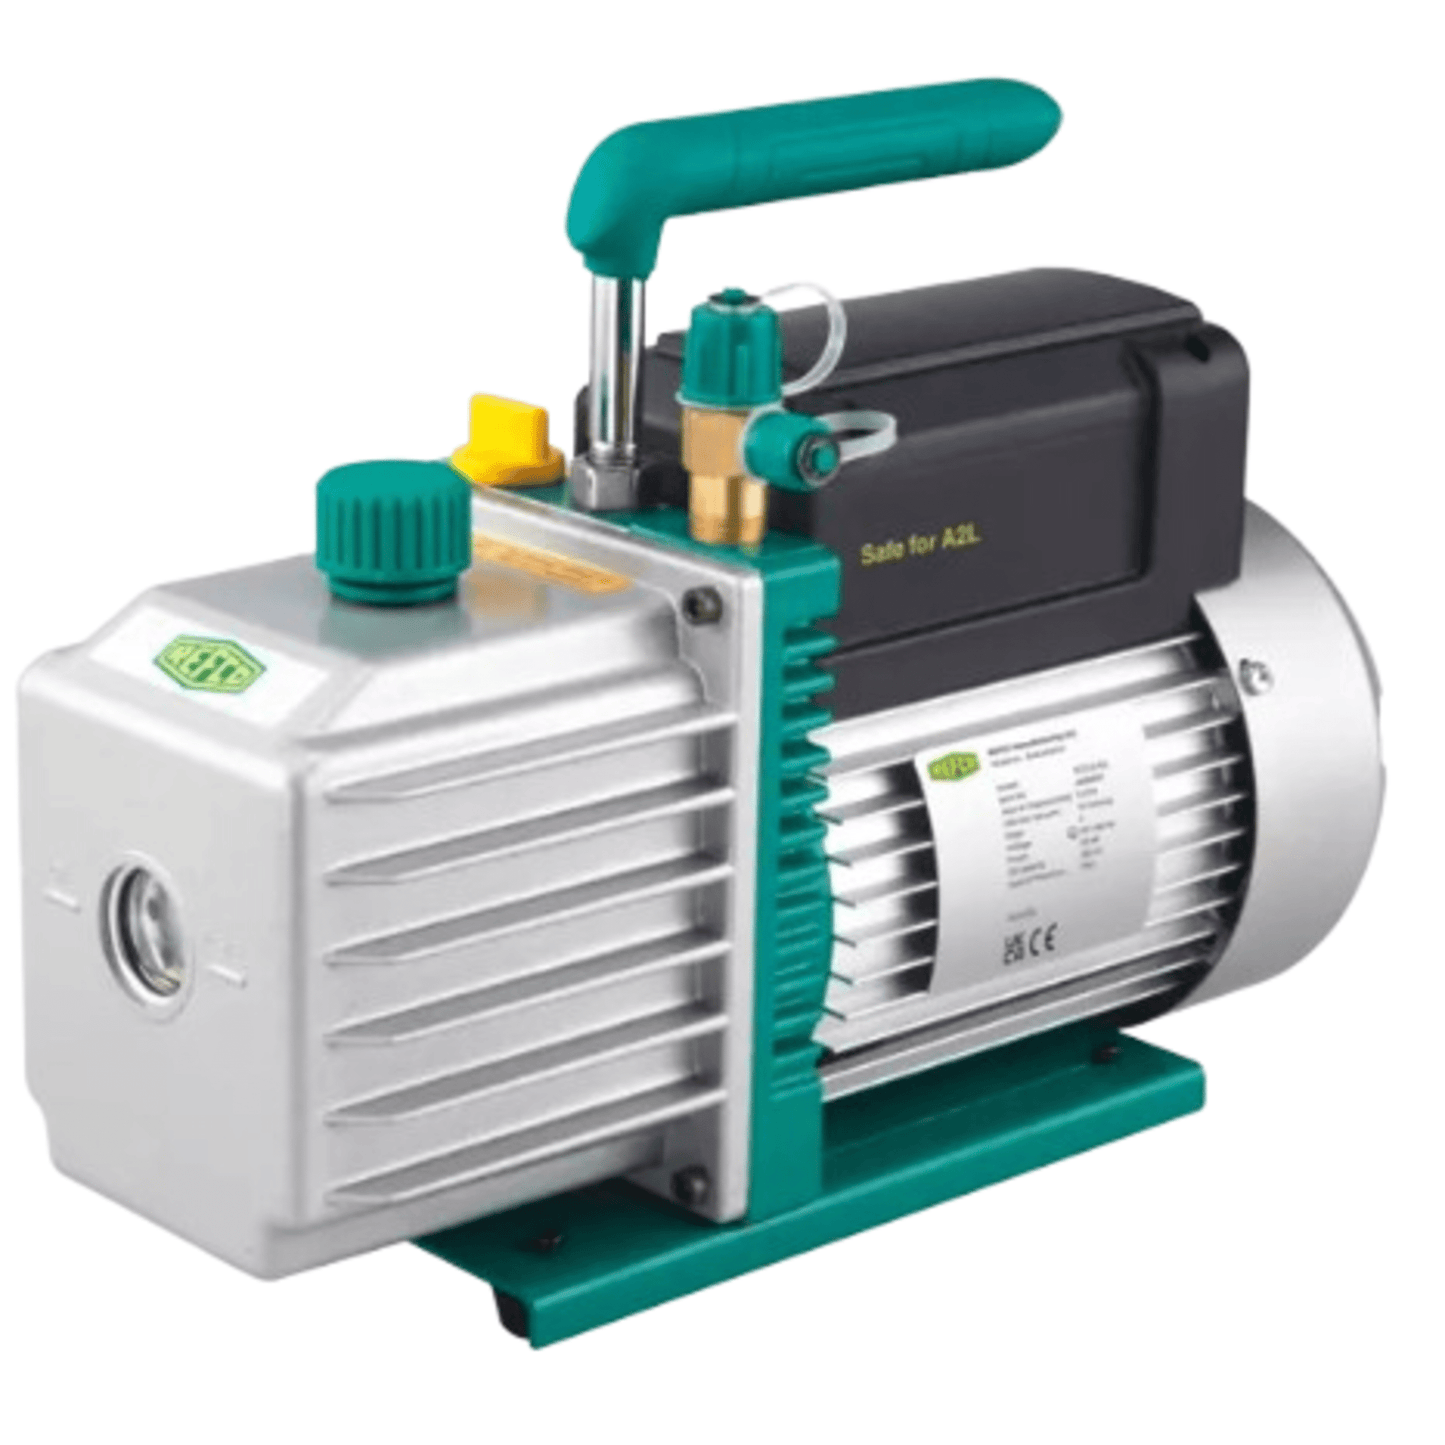 Refco 4688957, Two-stage vacuum pump, safe for A2L gases